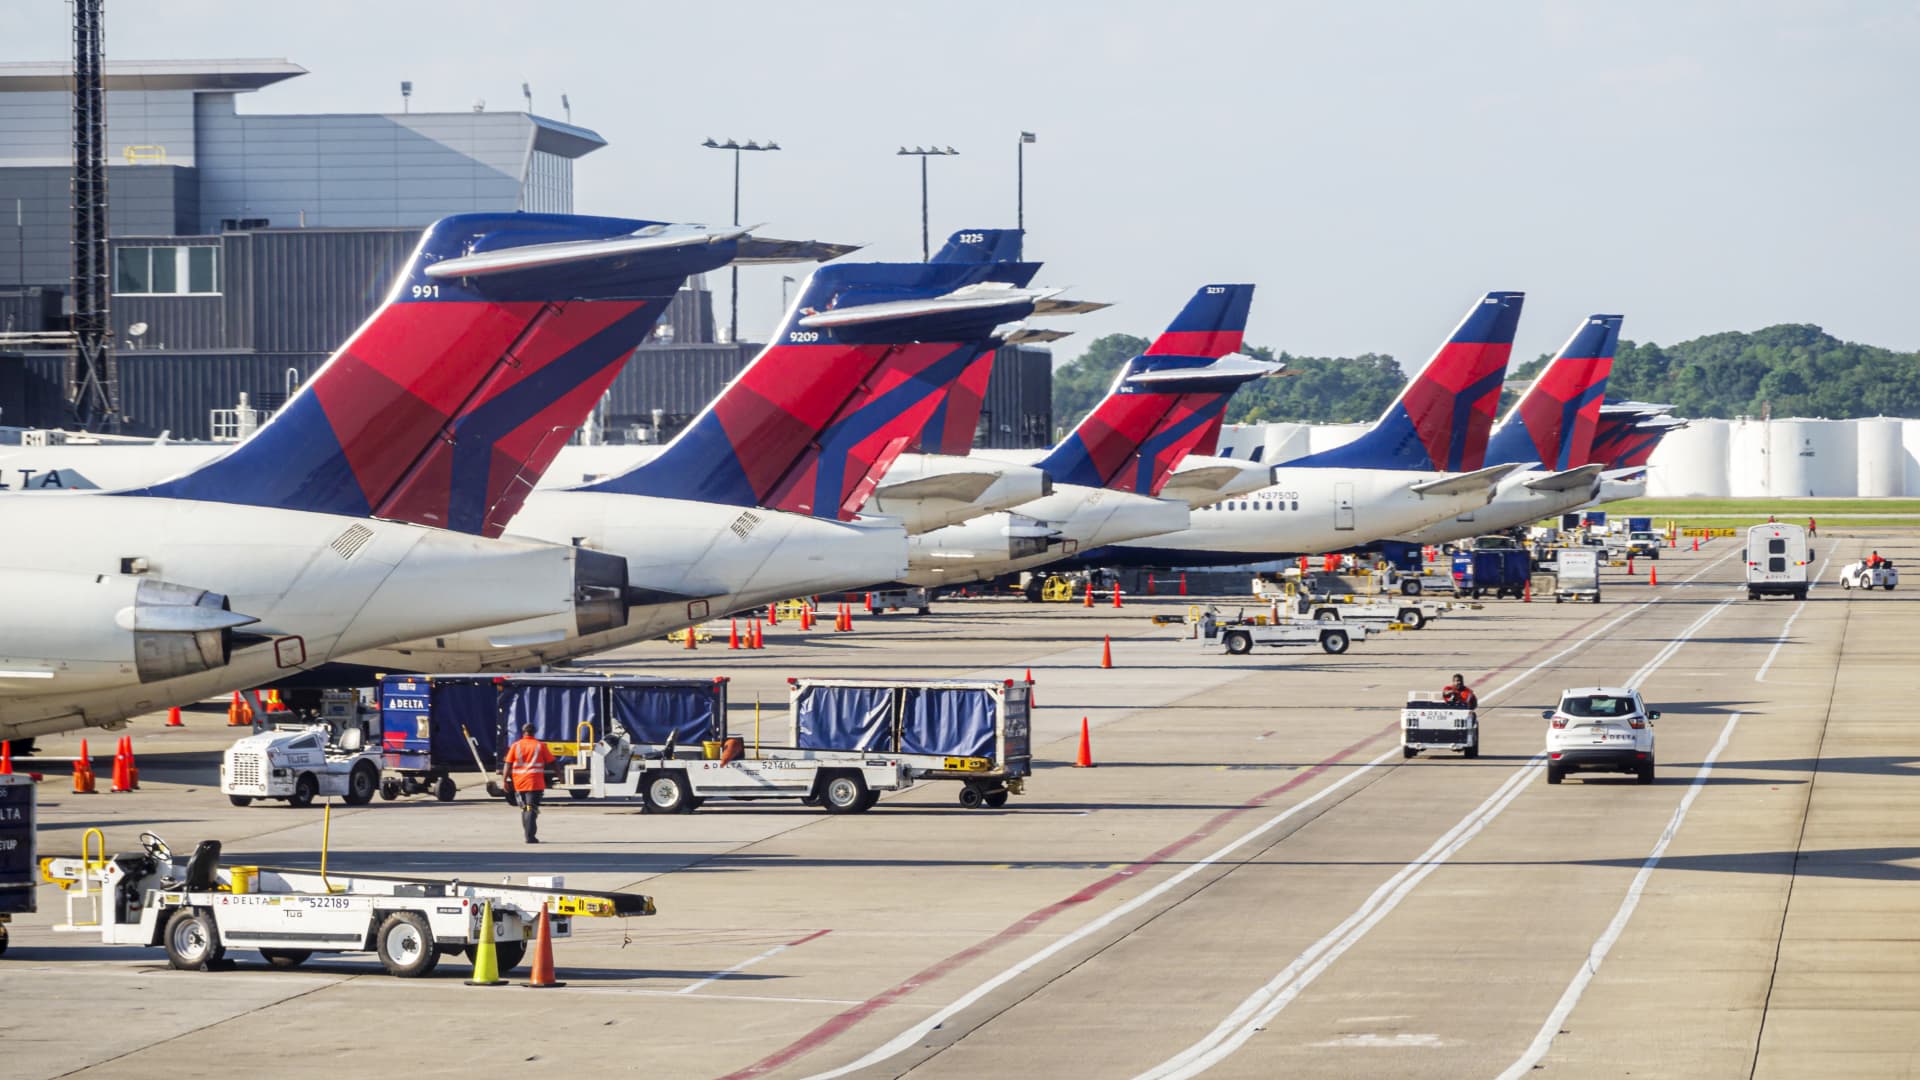 Delta's emergency savings initiative offers workers up to $1,000 each. Here's how it works